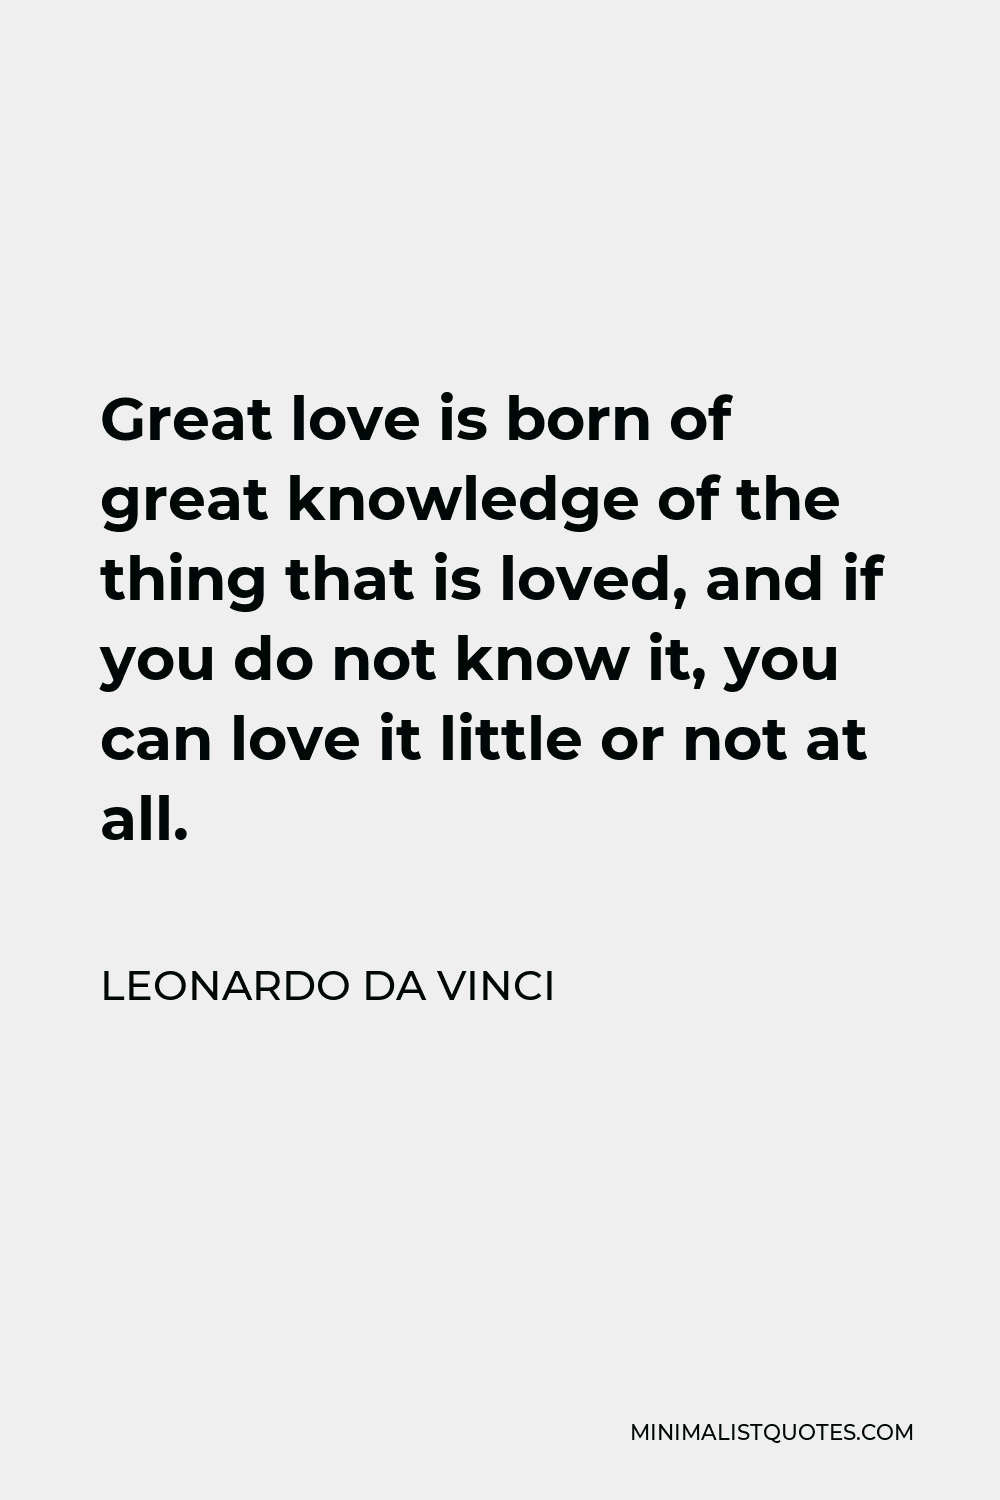 Leonardo da Vinci Quote - Great love is born of great knowledge of the thing that is loved, and if you do not know it, you can love it little or not at all.